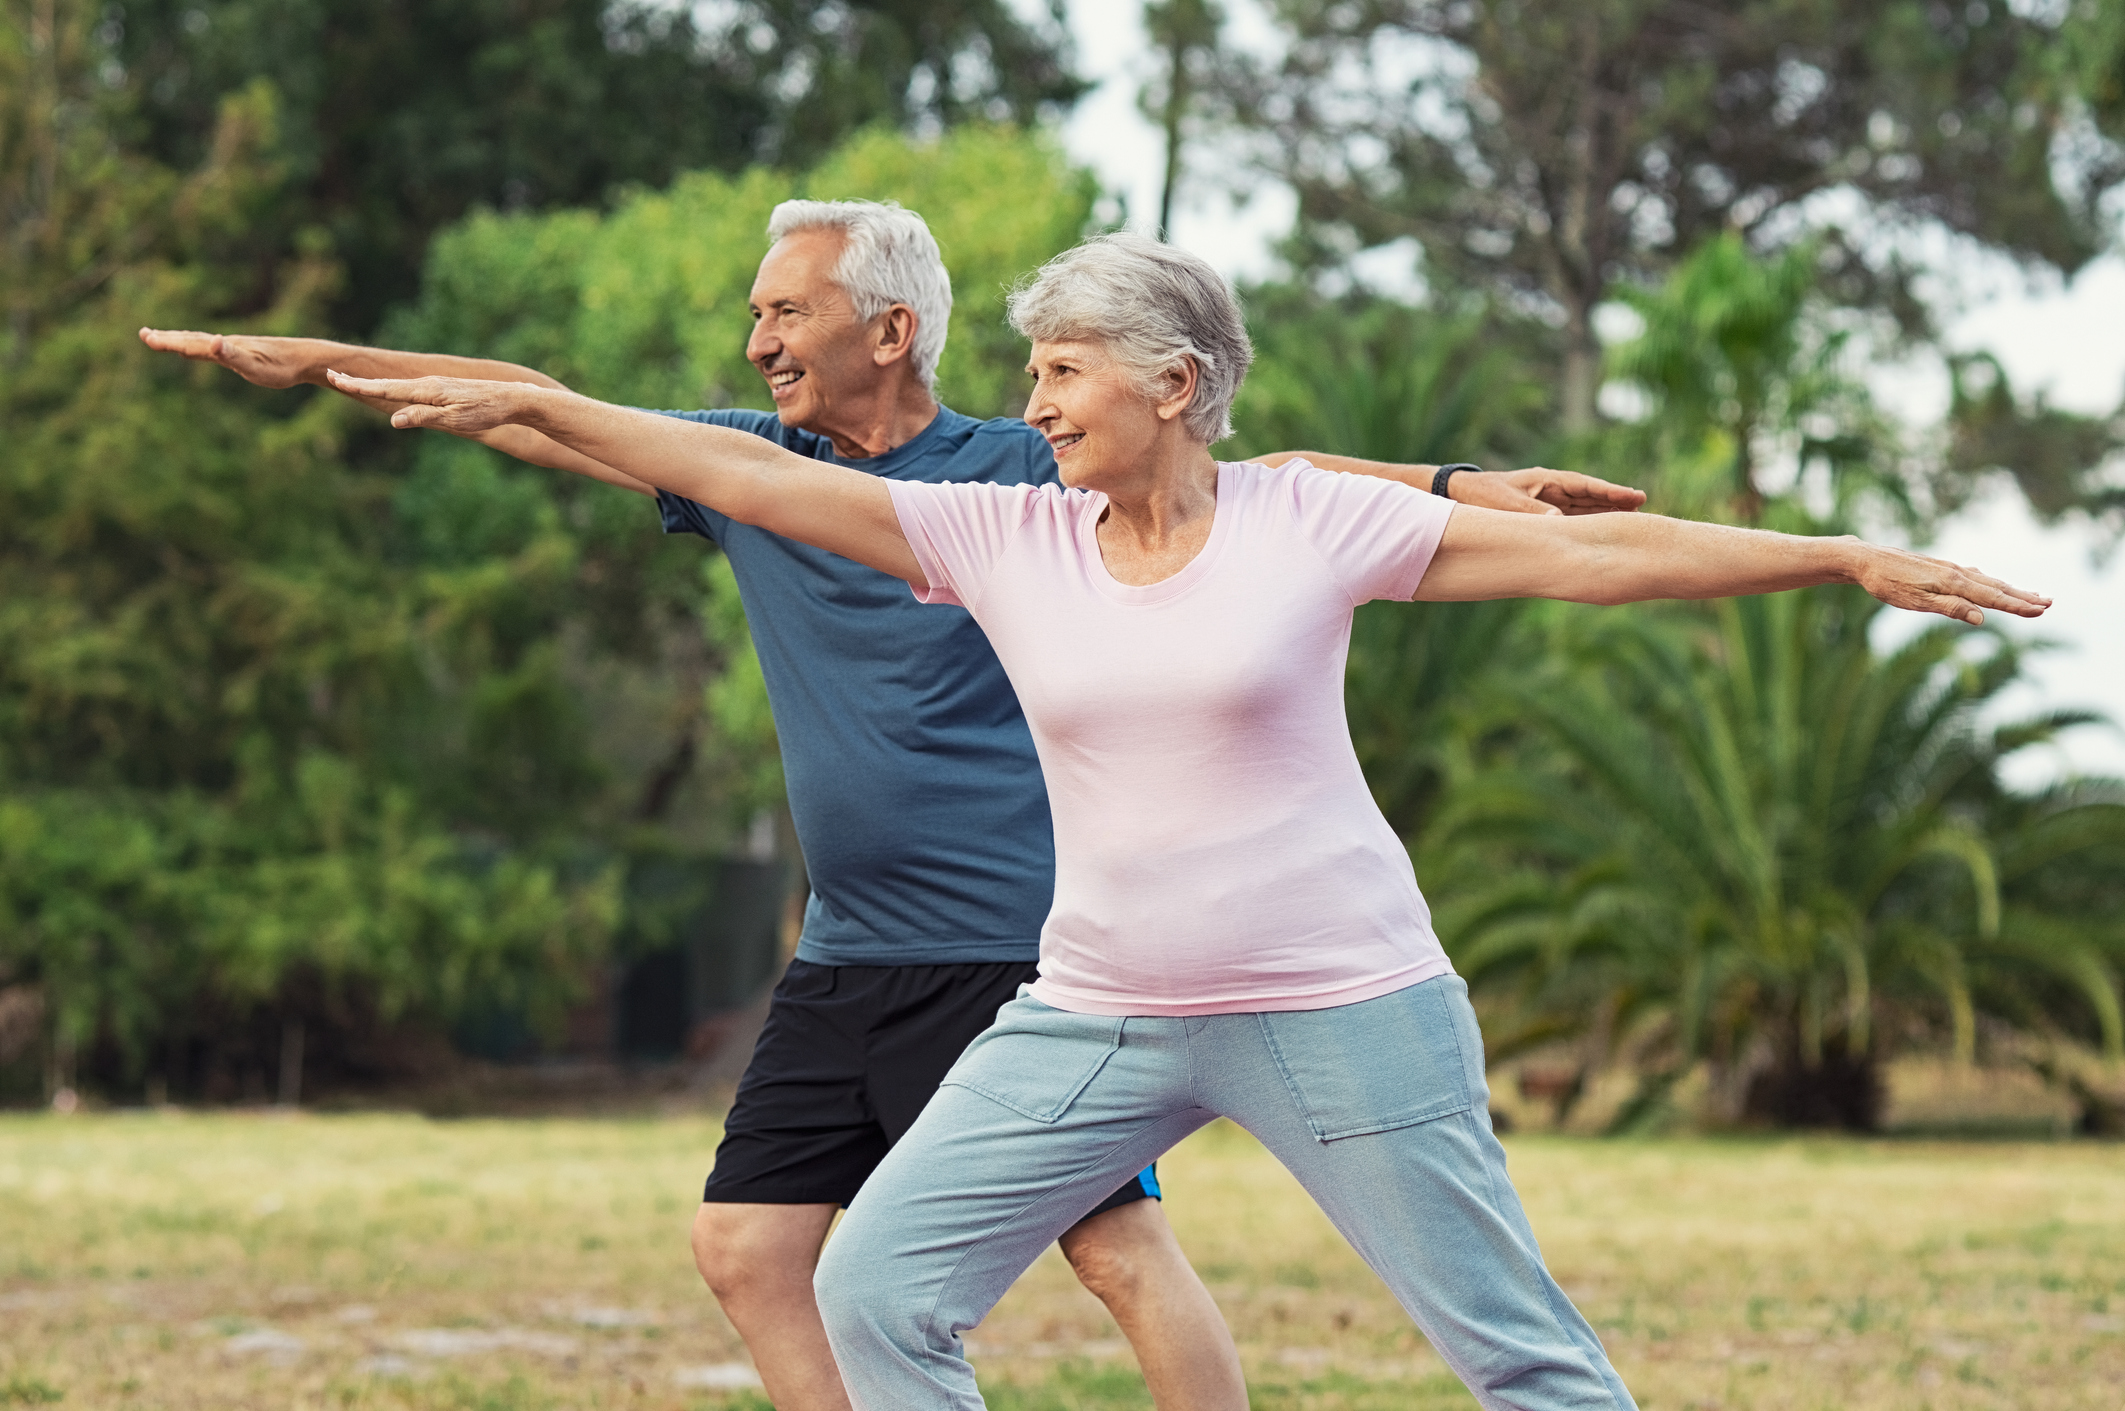 Simple exercises for older people, Advice